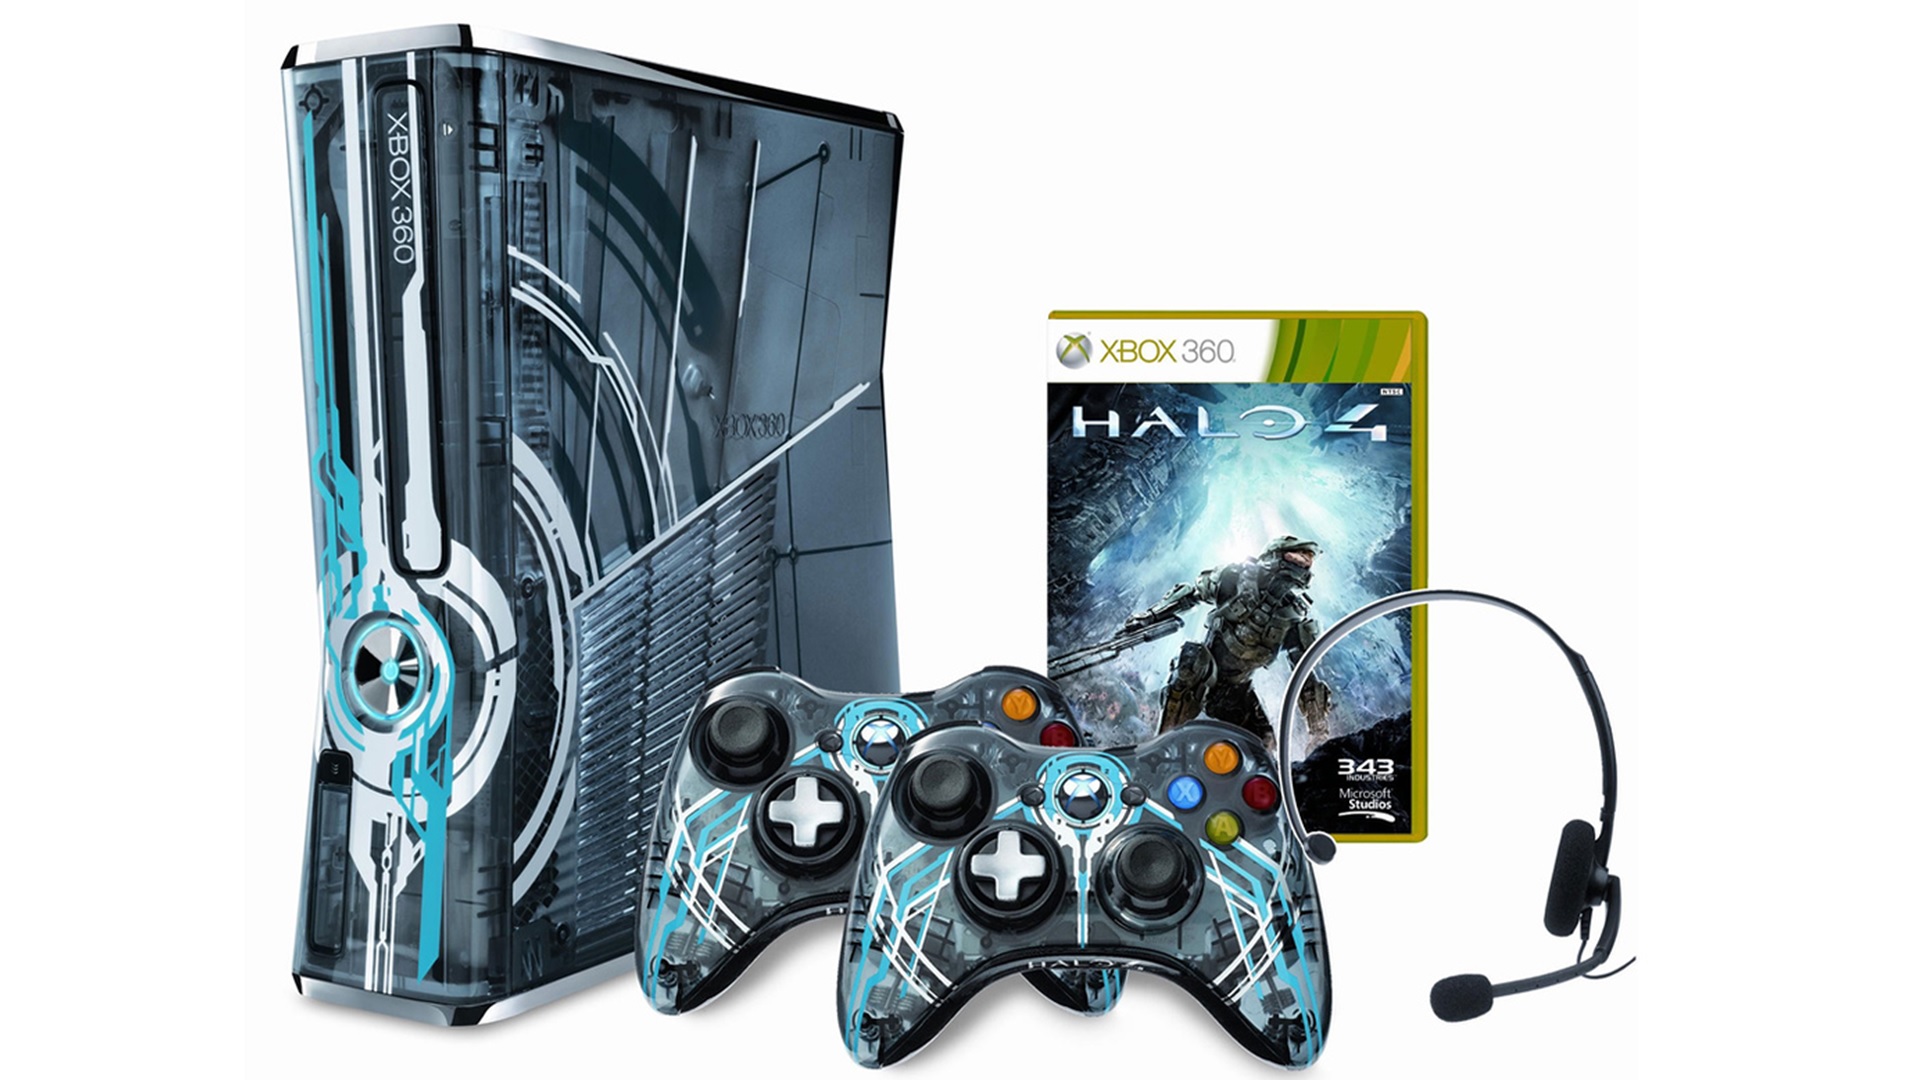 Image of Halo 4 Limited Edition Xbox 360 console